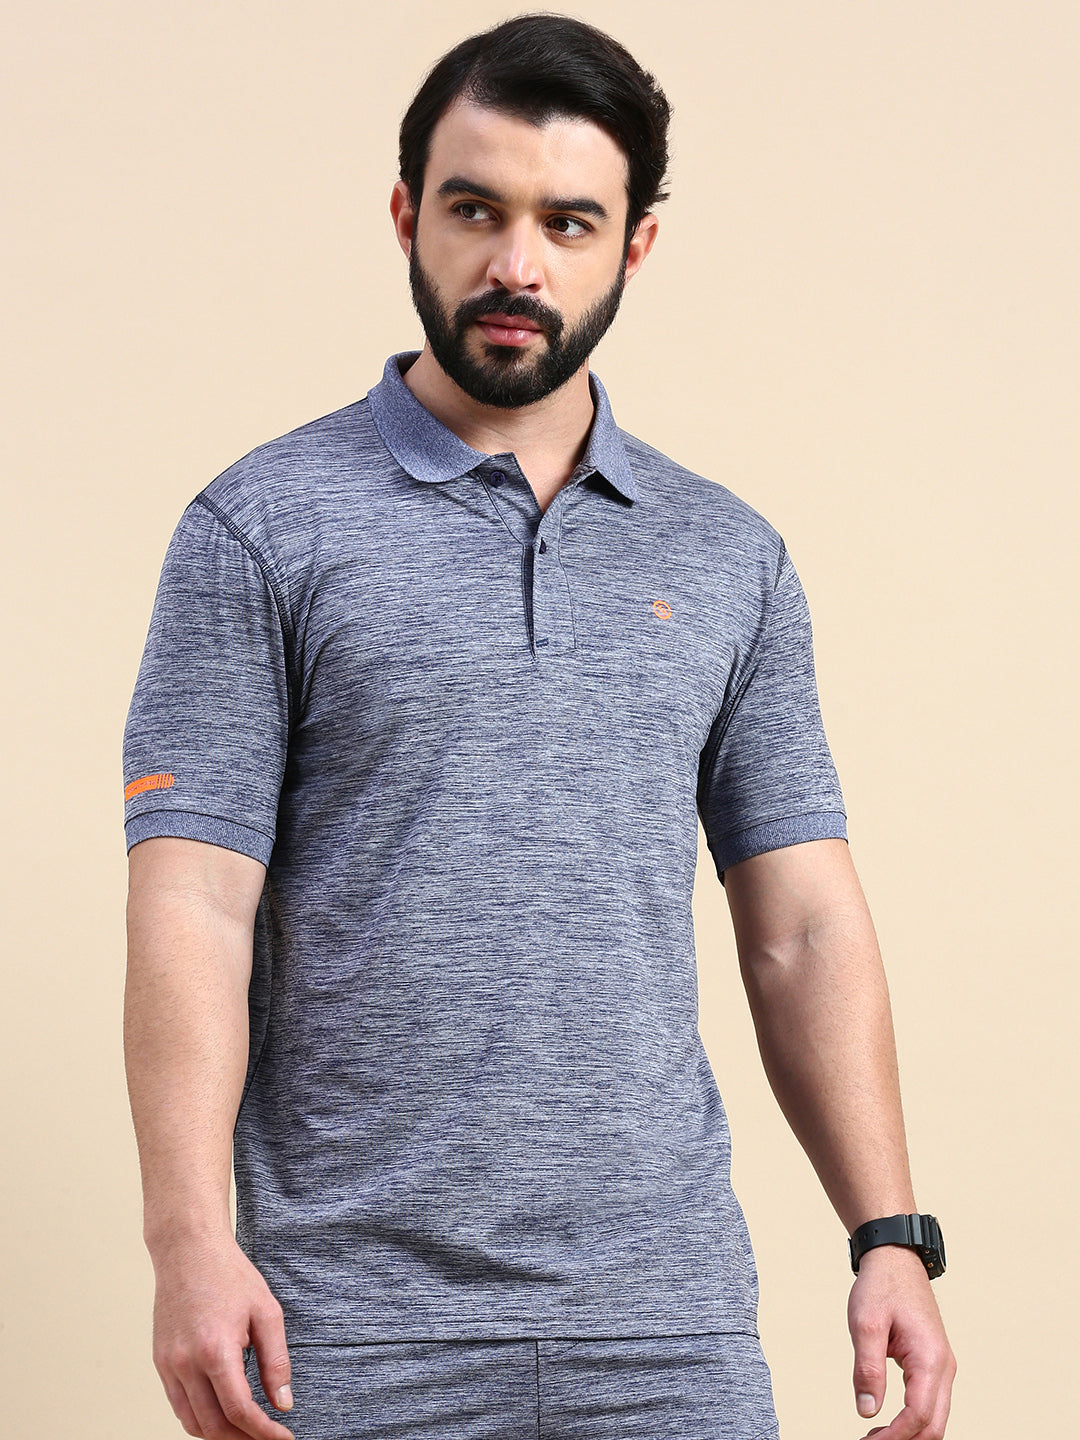 Classic Polo Men's Polo Neck Polyester Grey Slim Fit Active Wear T-Shirt | GENX-POLO-02C SF P